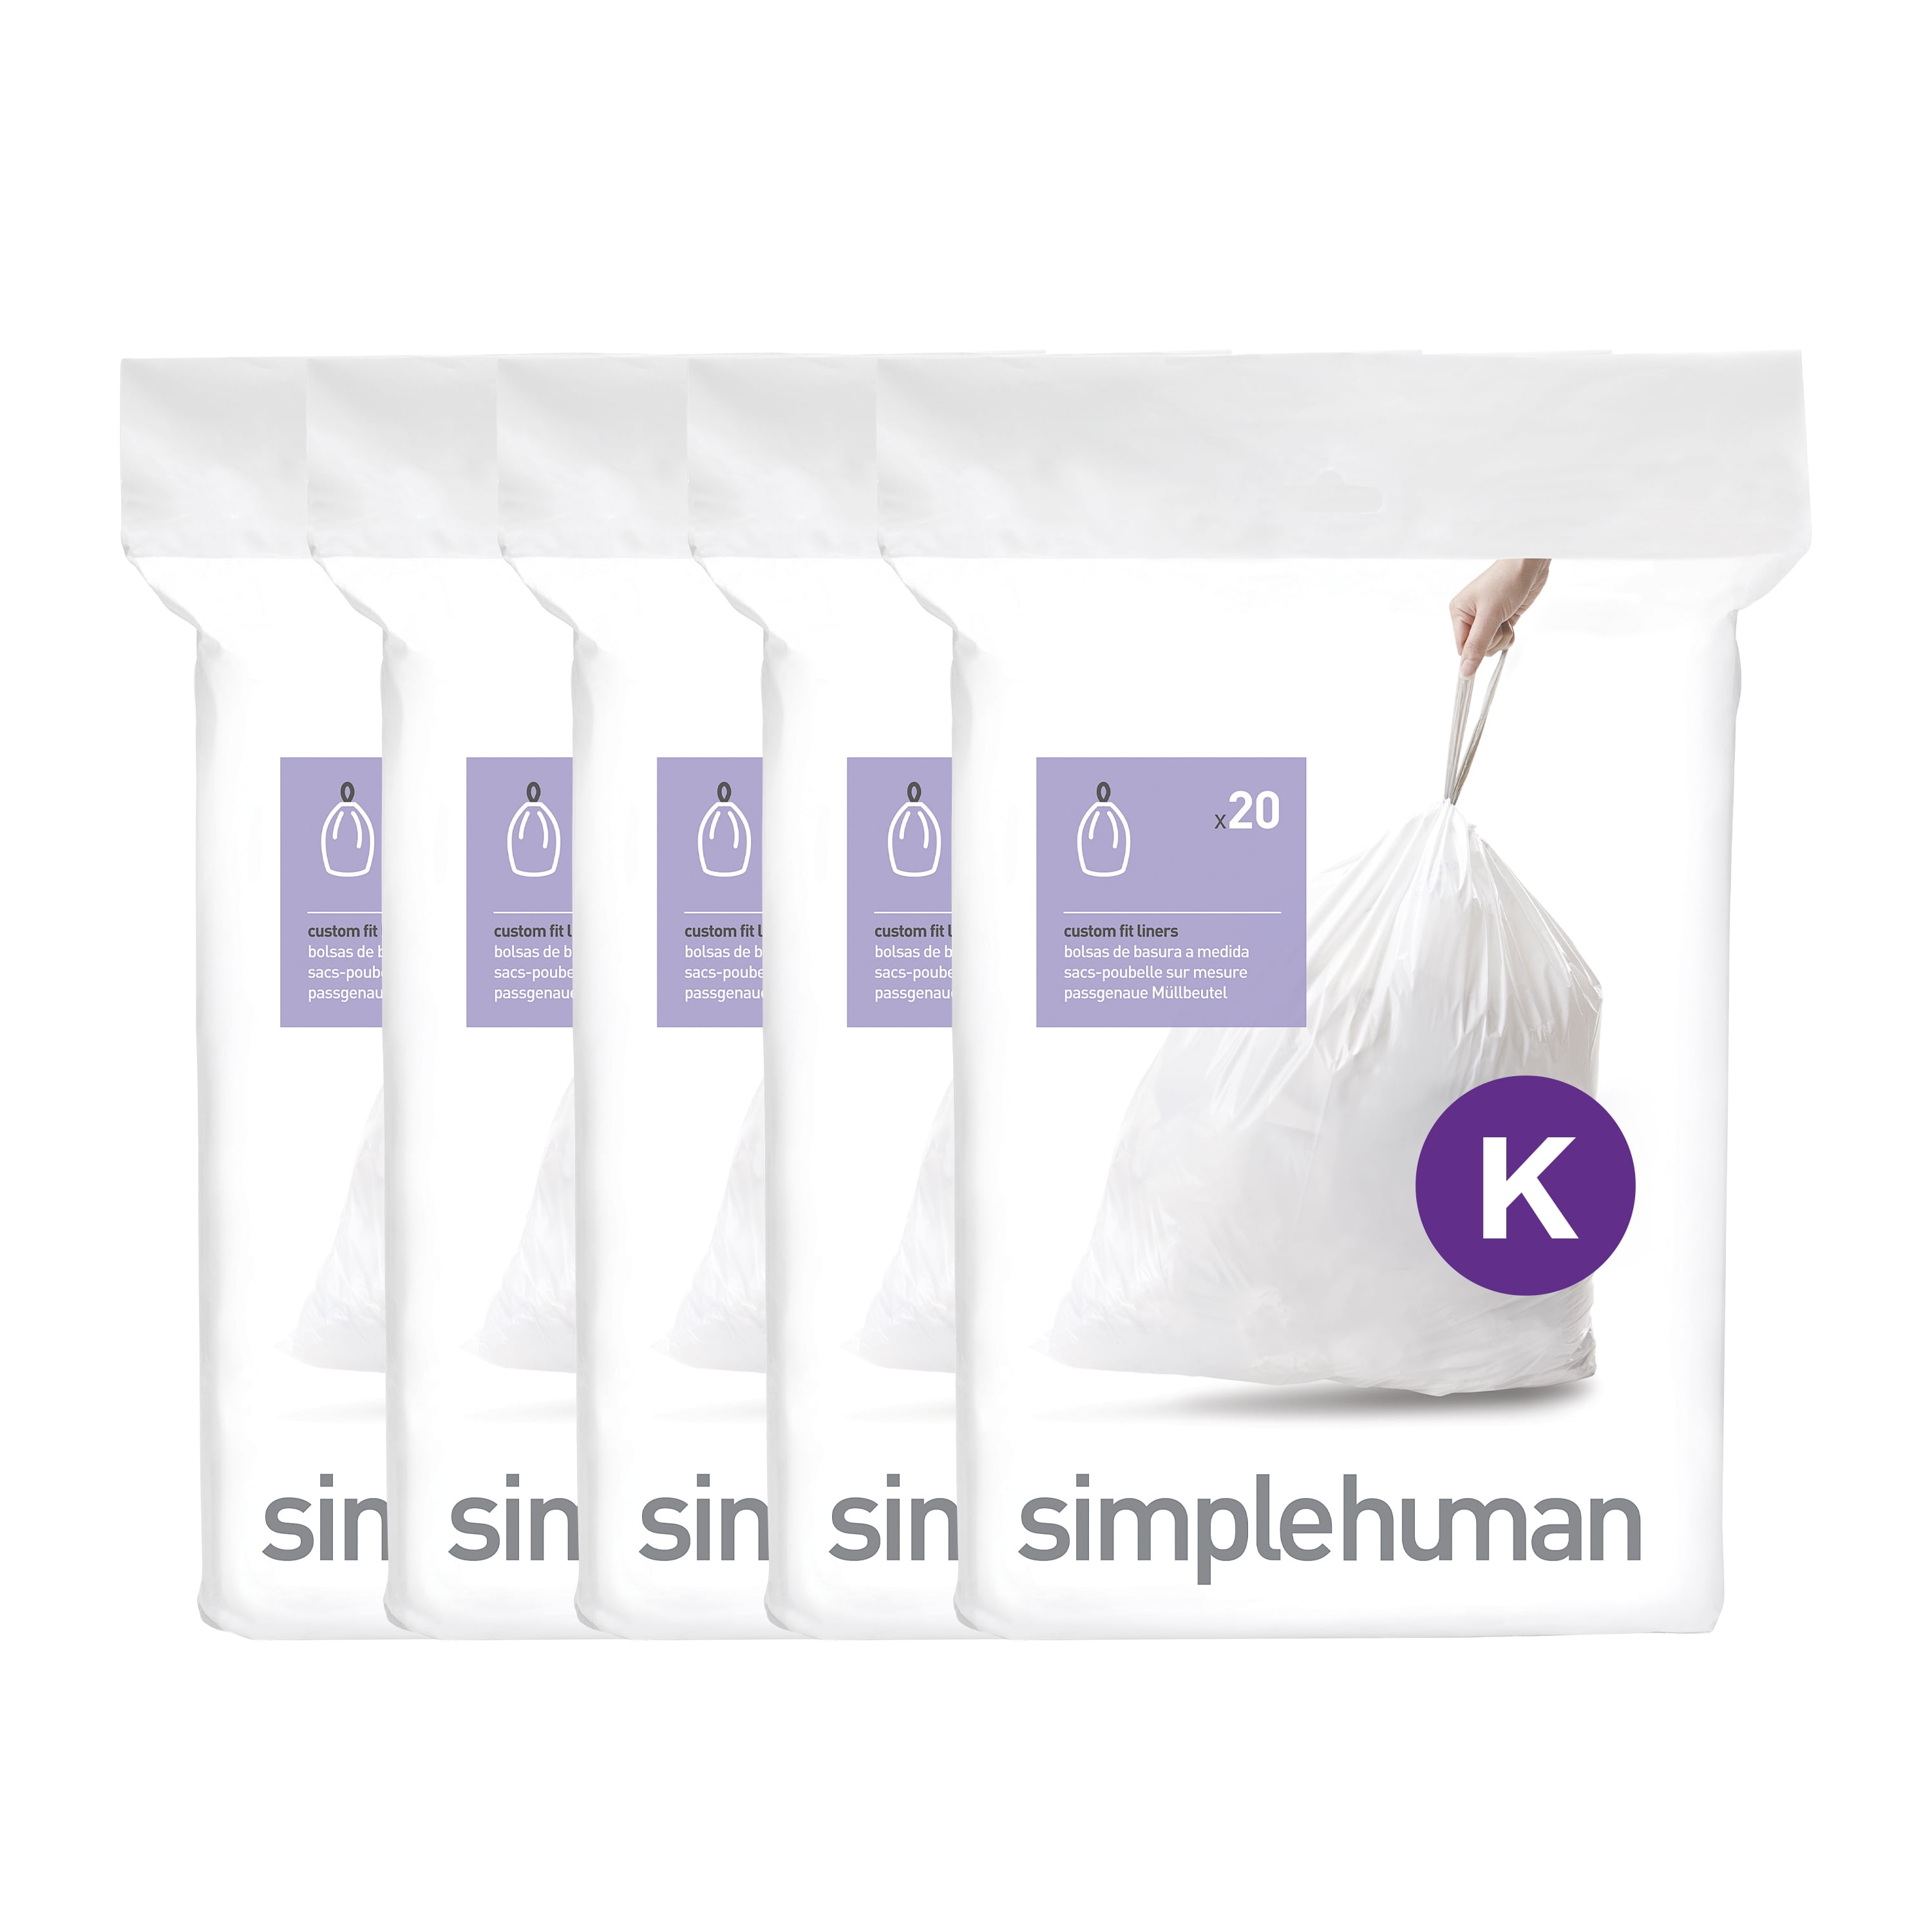 Compatible with simplehuman Code K 200 Count. Made in The USA. Eco-Friendly. Durable Custom Plastic Trash Bags w/Drawstring, 35-45 Liter/ 9-12